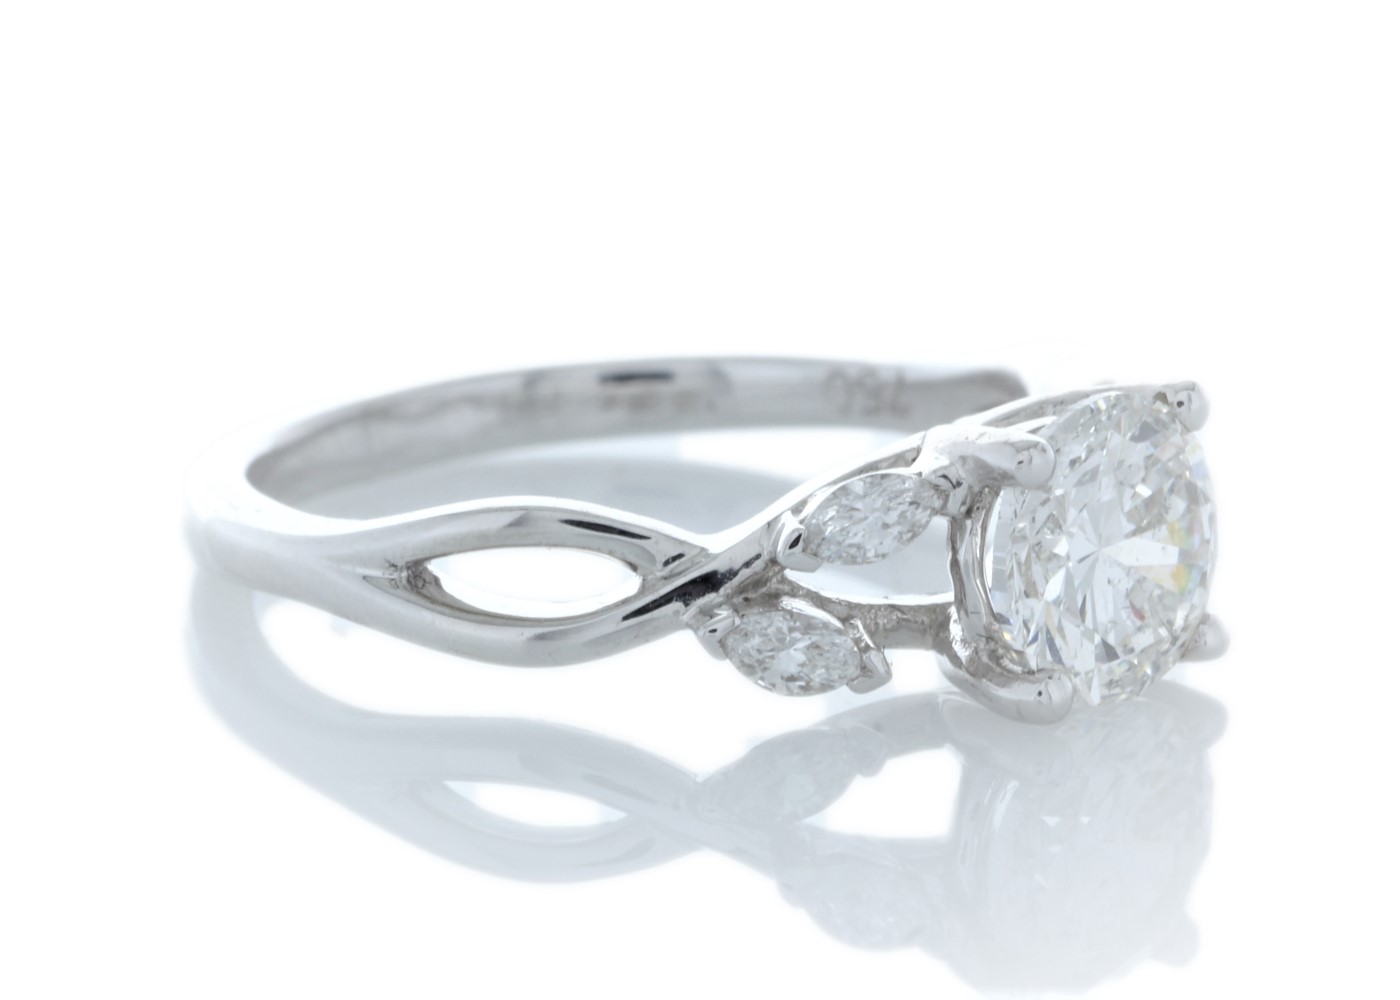 18ct White Gold Single Stone Diamond Ring With Marquise Set Shoulders (1.00) 1.16 Carats - Image 4 of 5